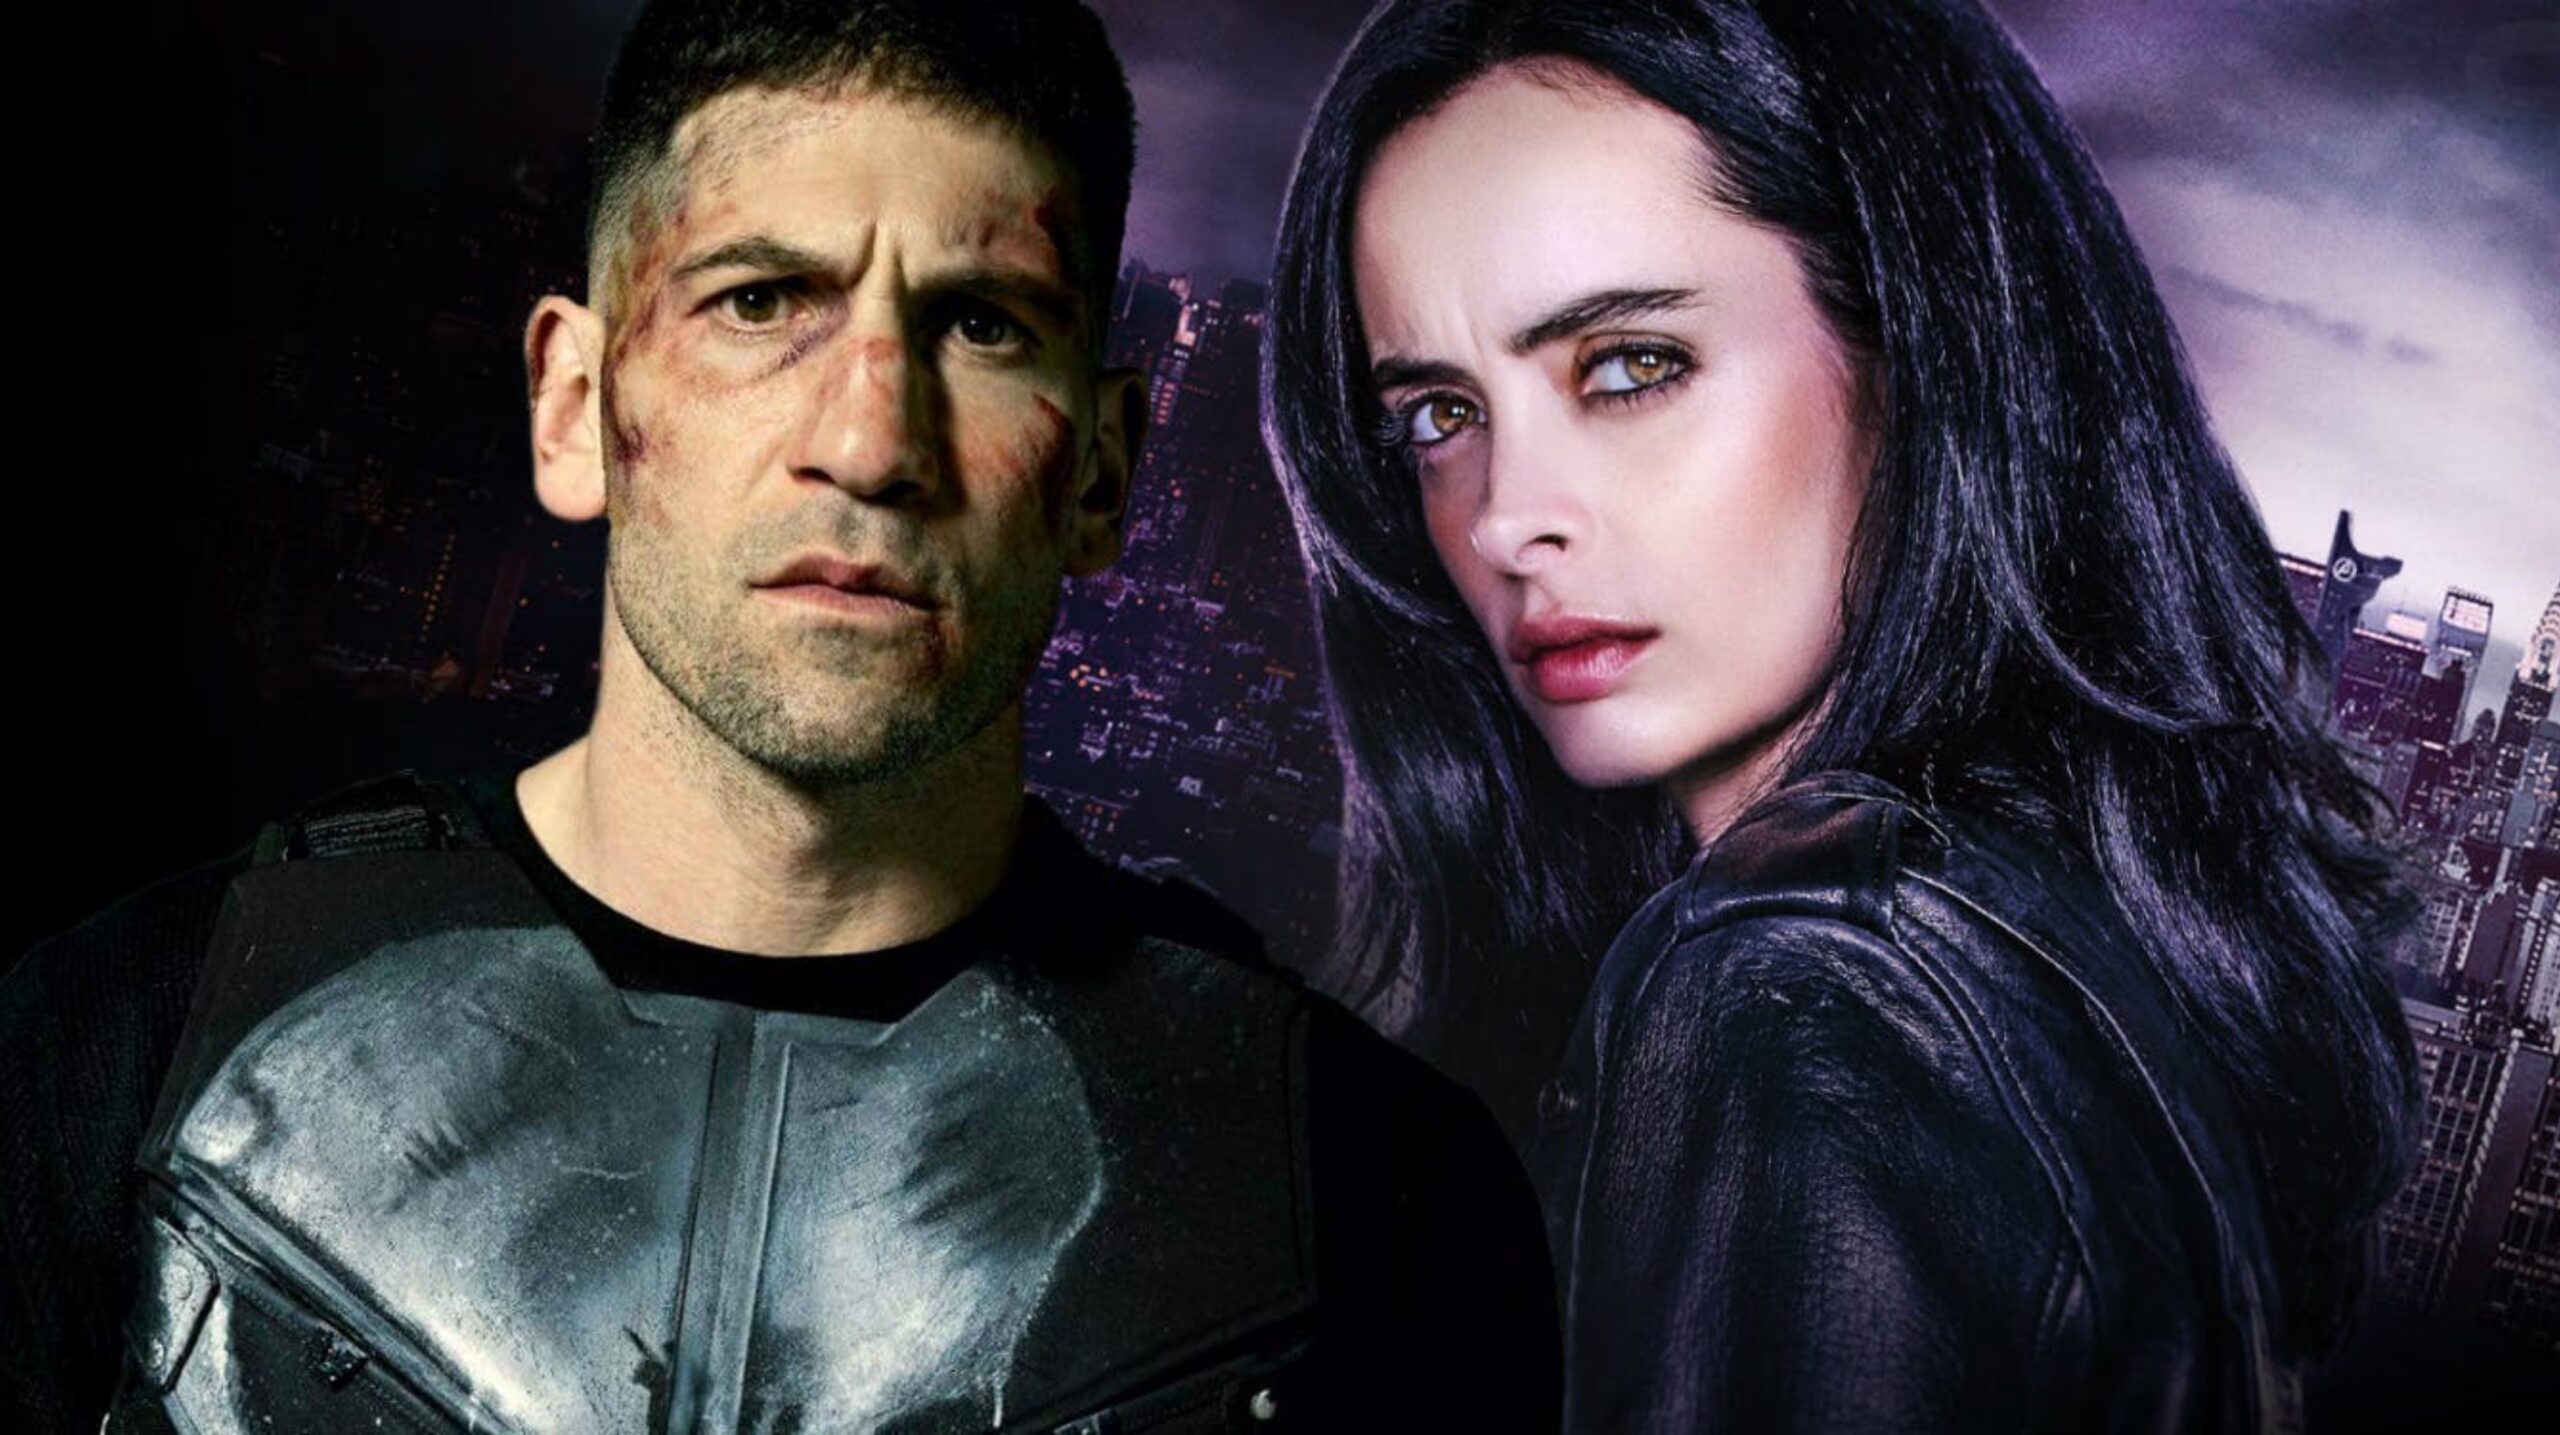 The Punisher and Jessica Jones from the Marvel Netflix series